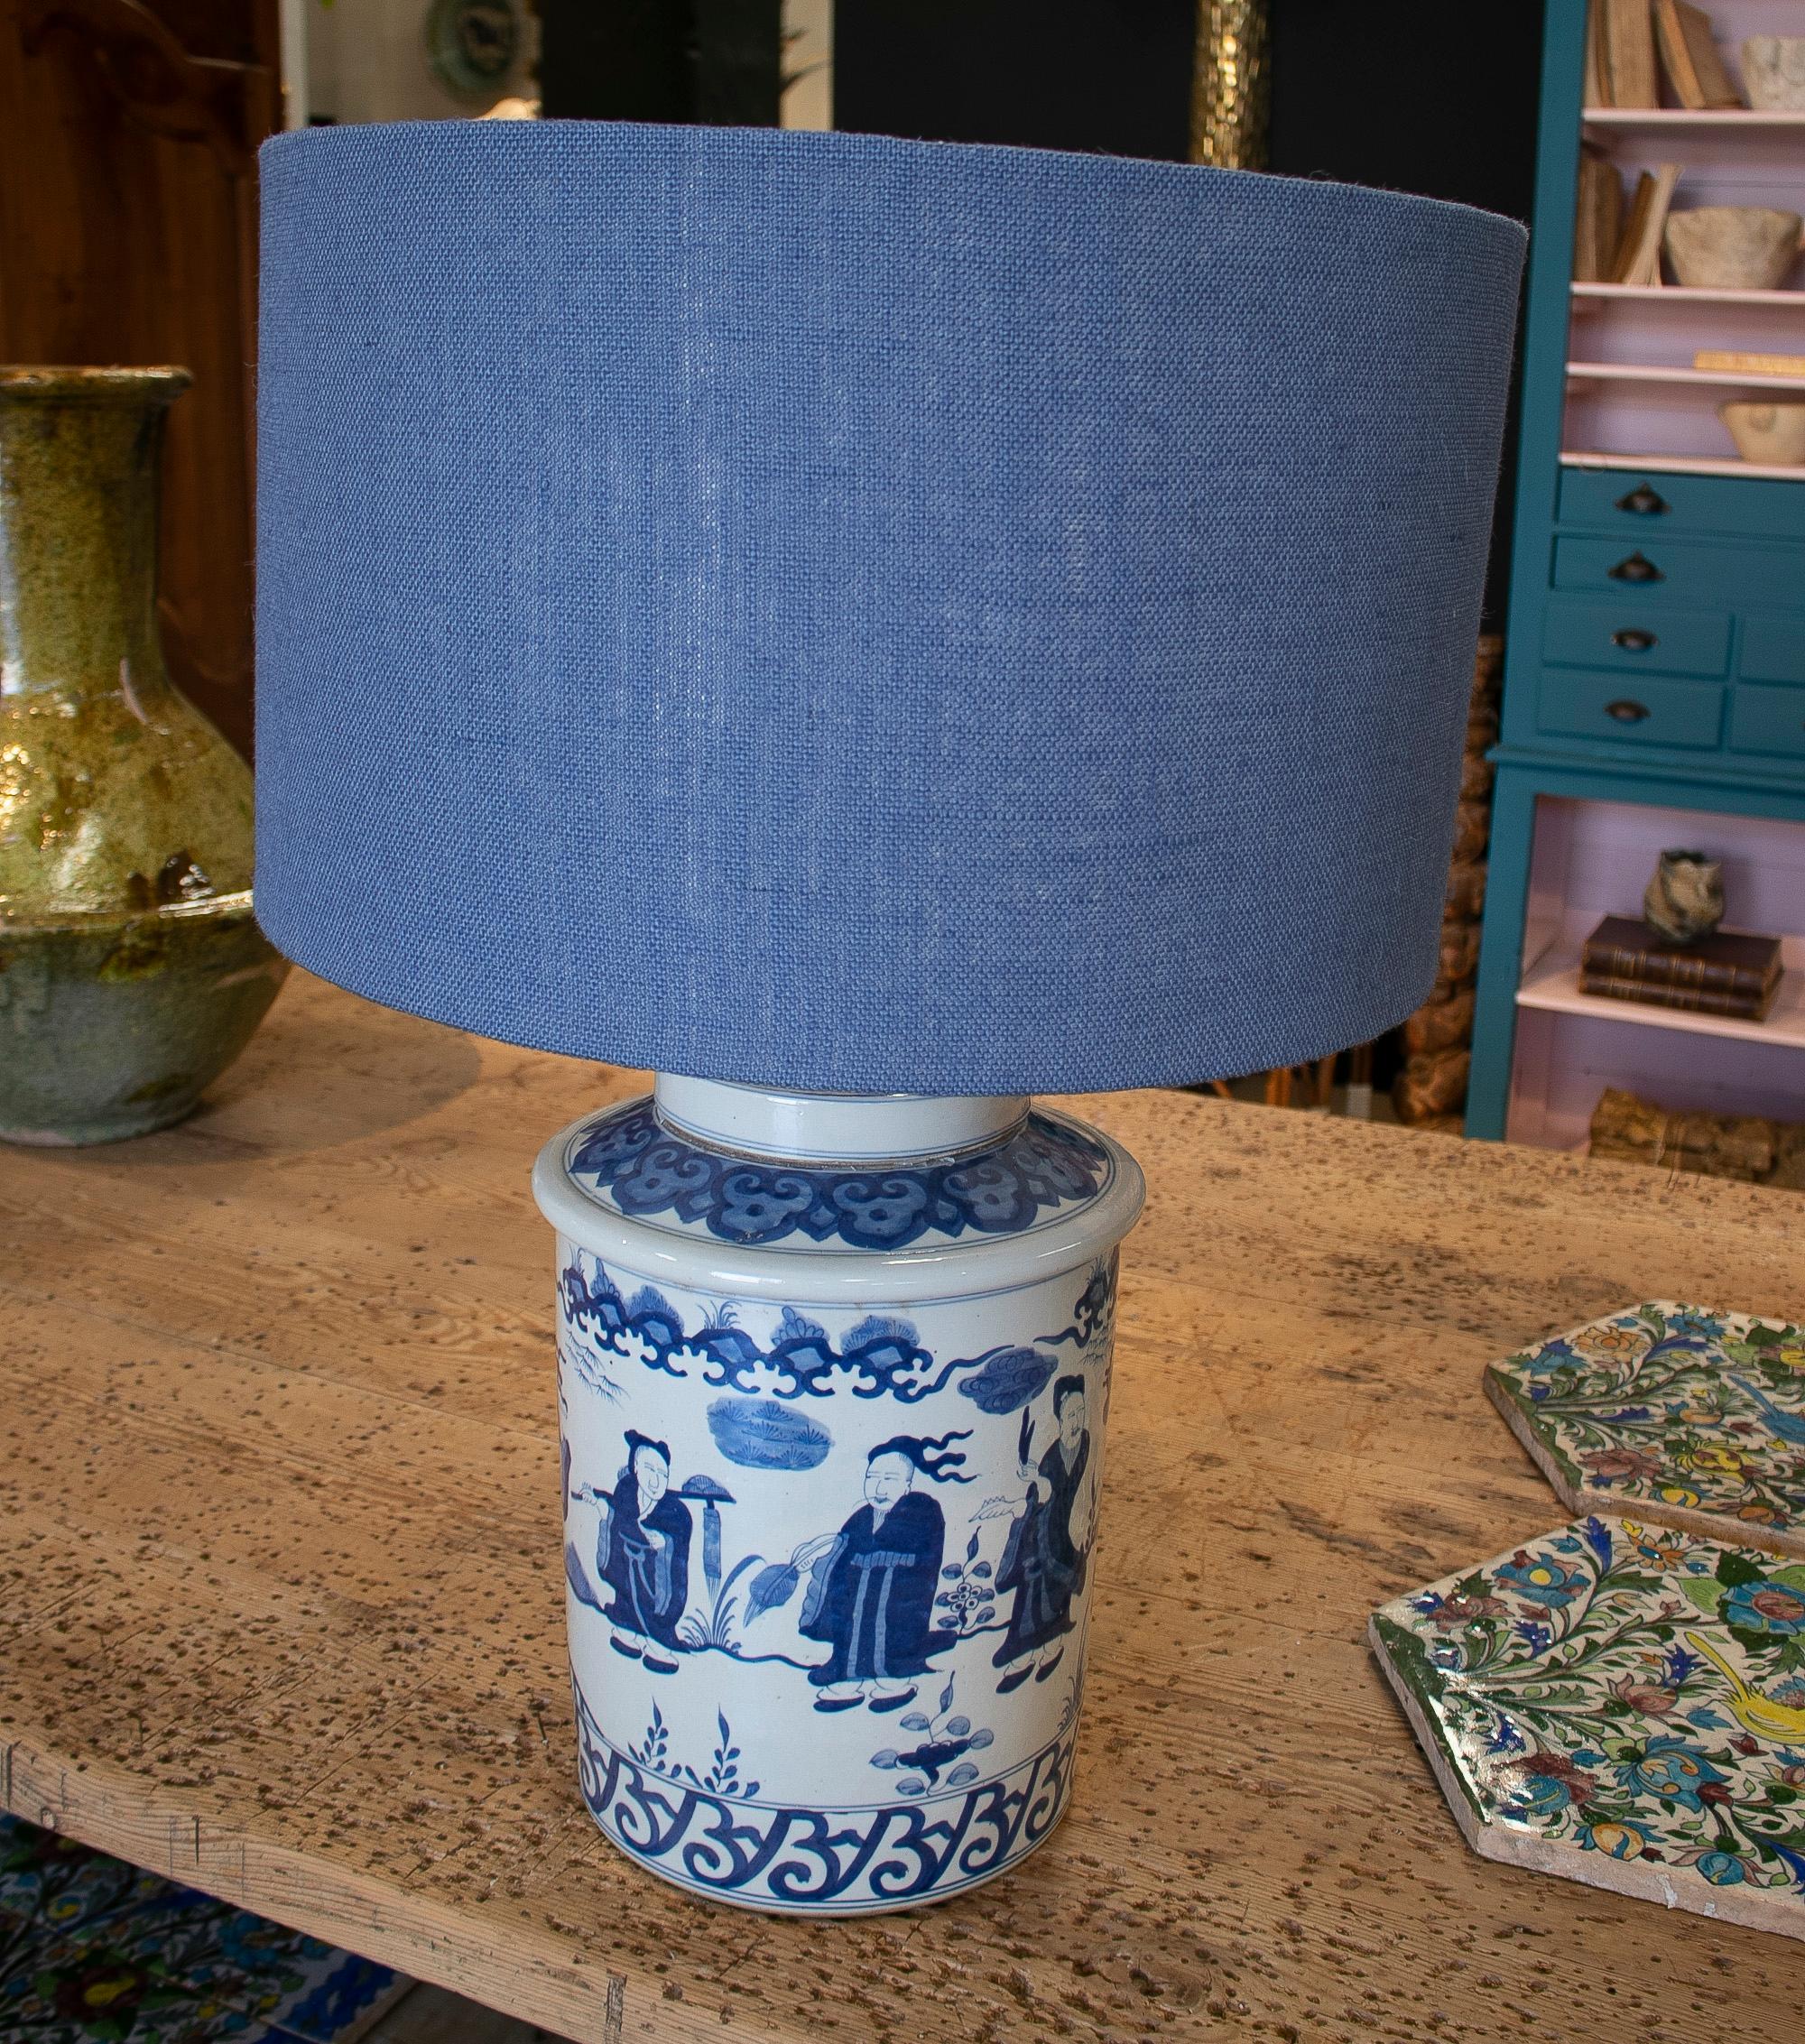 1990s Chinese Asian style white and cobalt blue porcelain table lamp.

Lamp shade not included. 

Dimensions with shade:73 x 50cm
Dimensions without shade: 50 x 25cm.